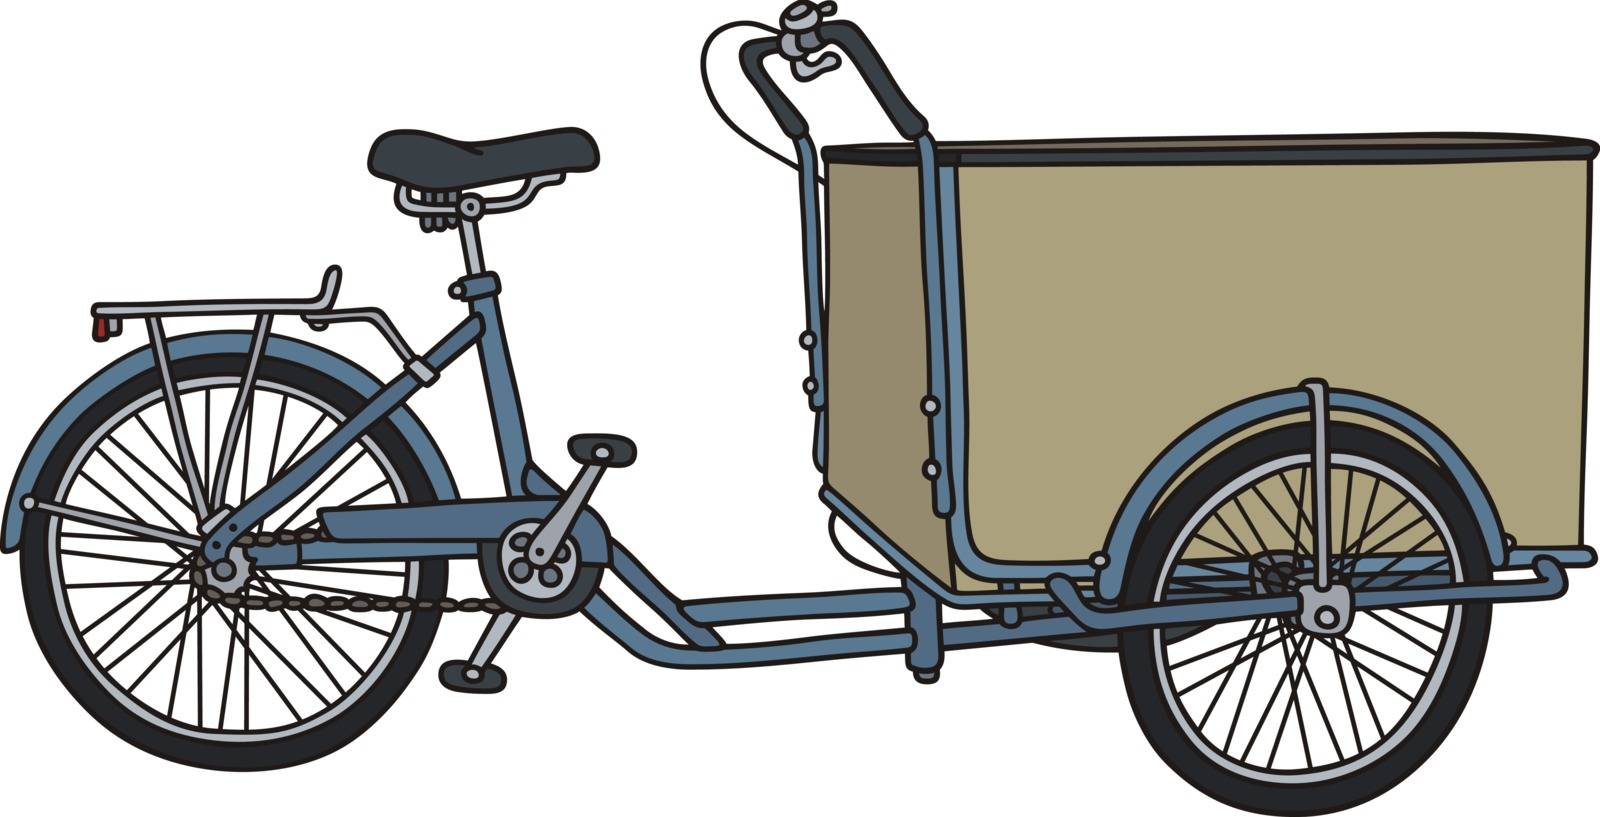 Hand drawing of a classic blue bakery freight pedal tricycle rickshaw